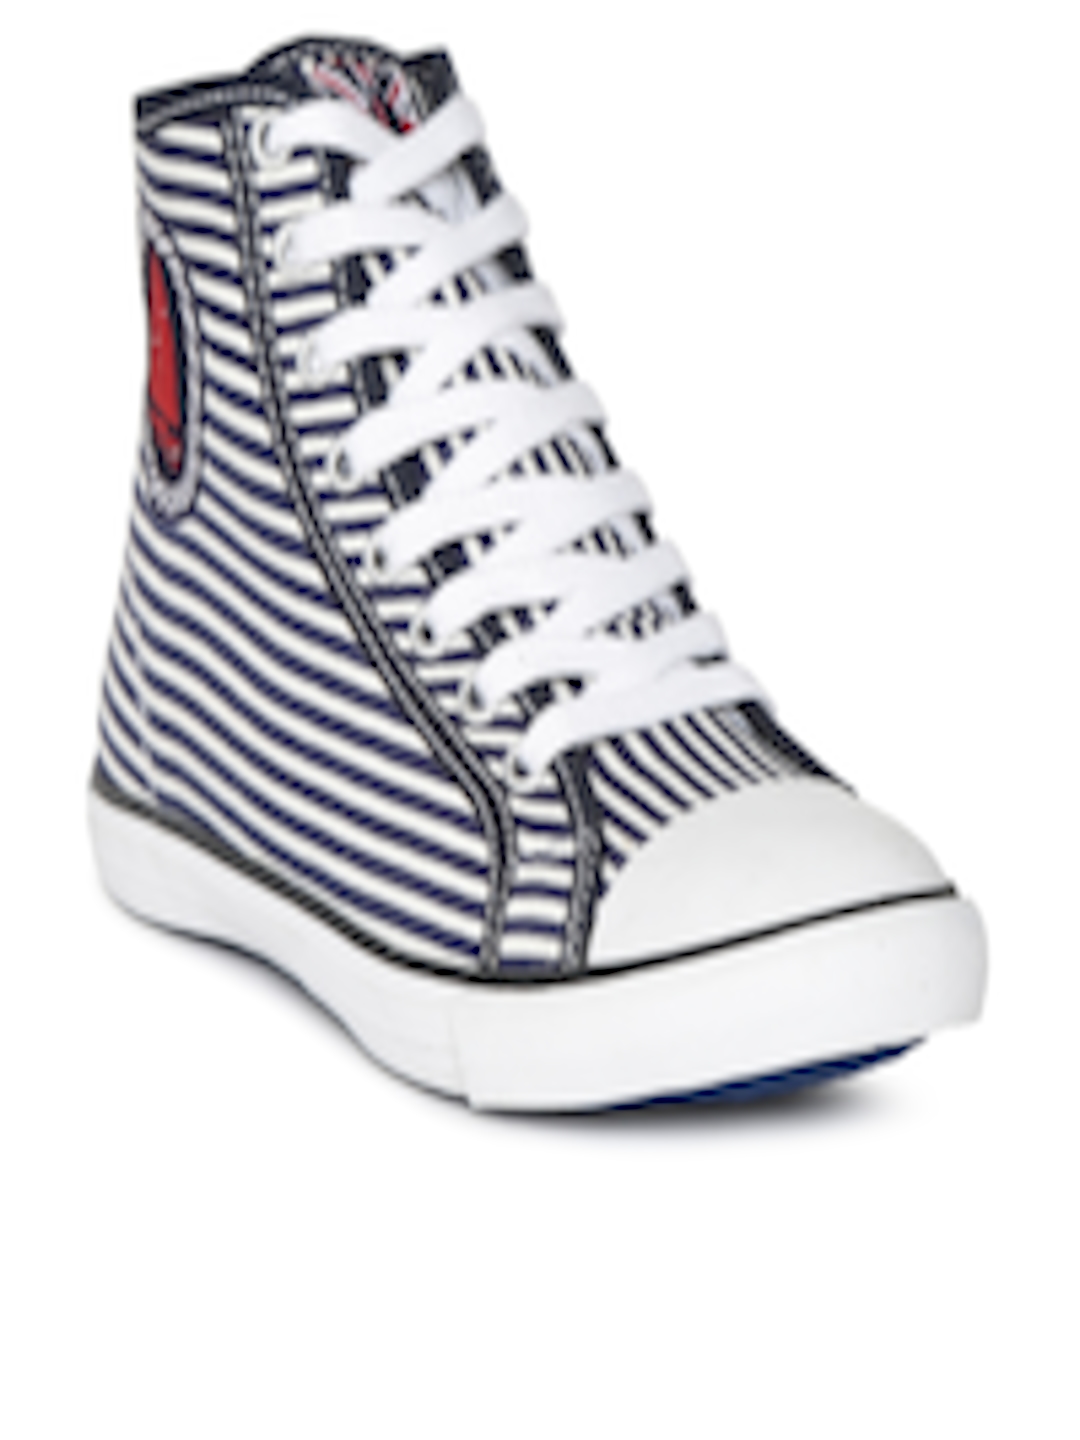 Buy West Bay Kids Navy & White Striped High Top Sneakers - Casual Shoes ...